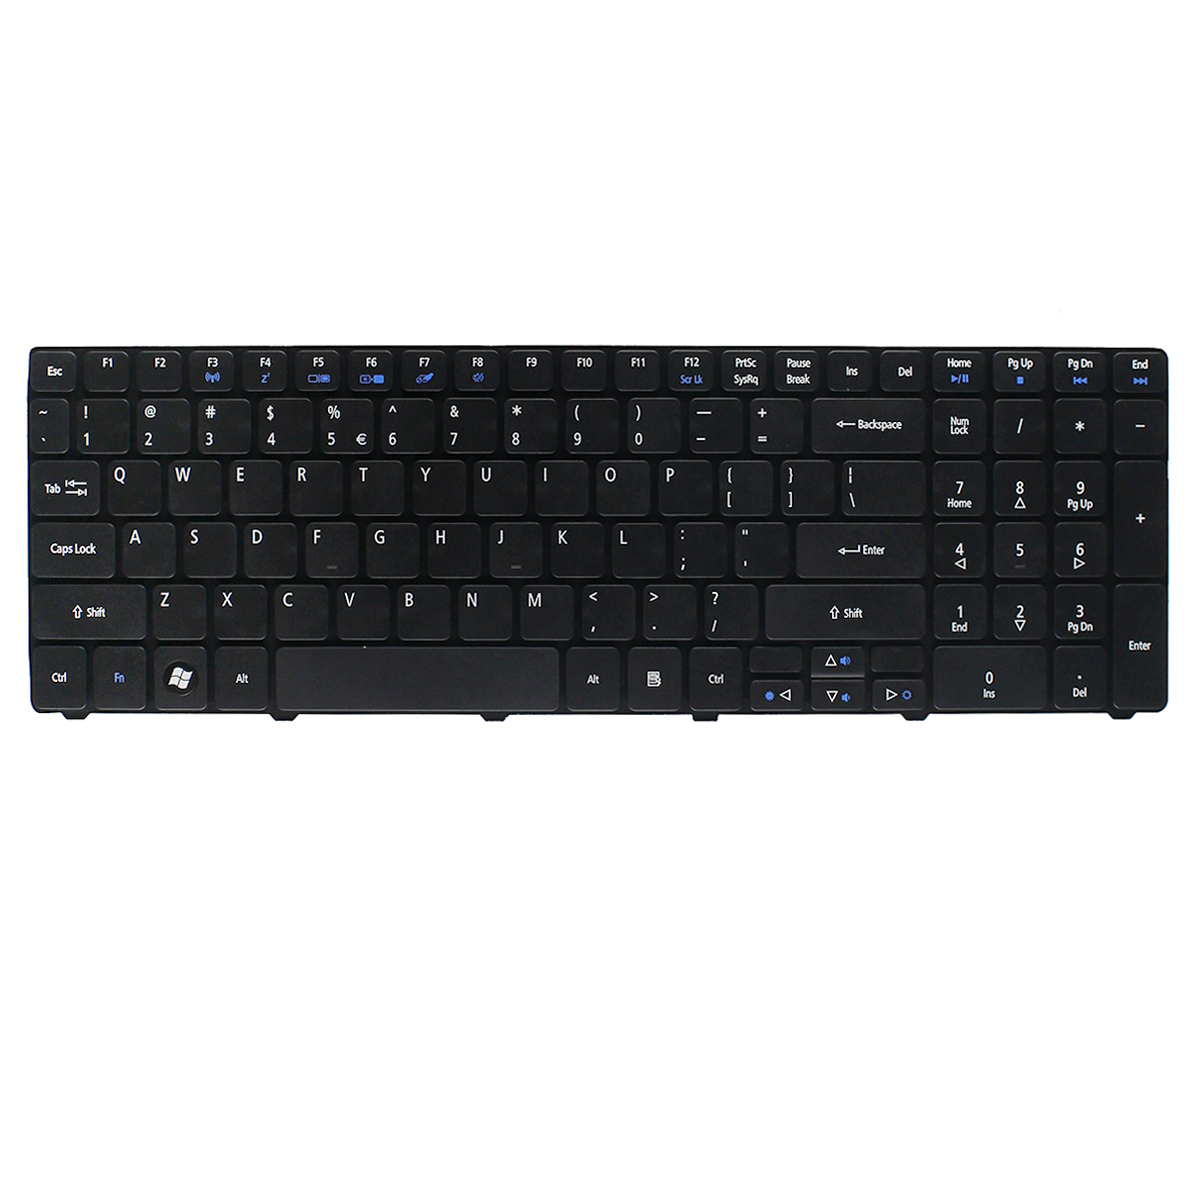 New Keyboard for Acer Aspire 5733 5733Z 5749 5749Z 5759 7560 La - Click Image to Close